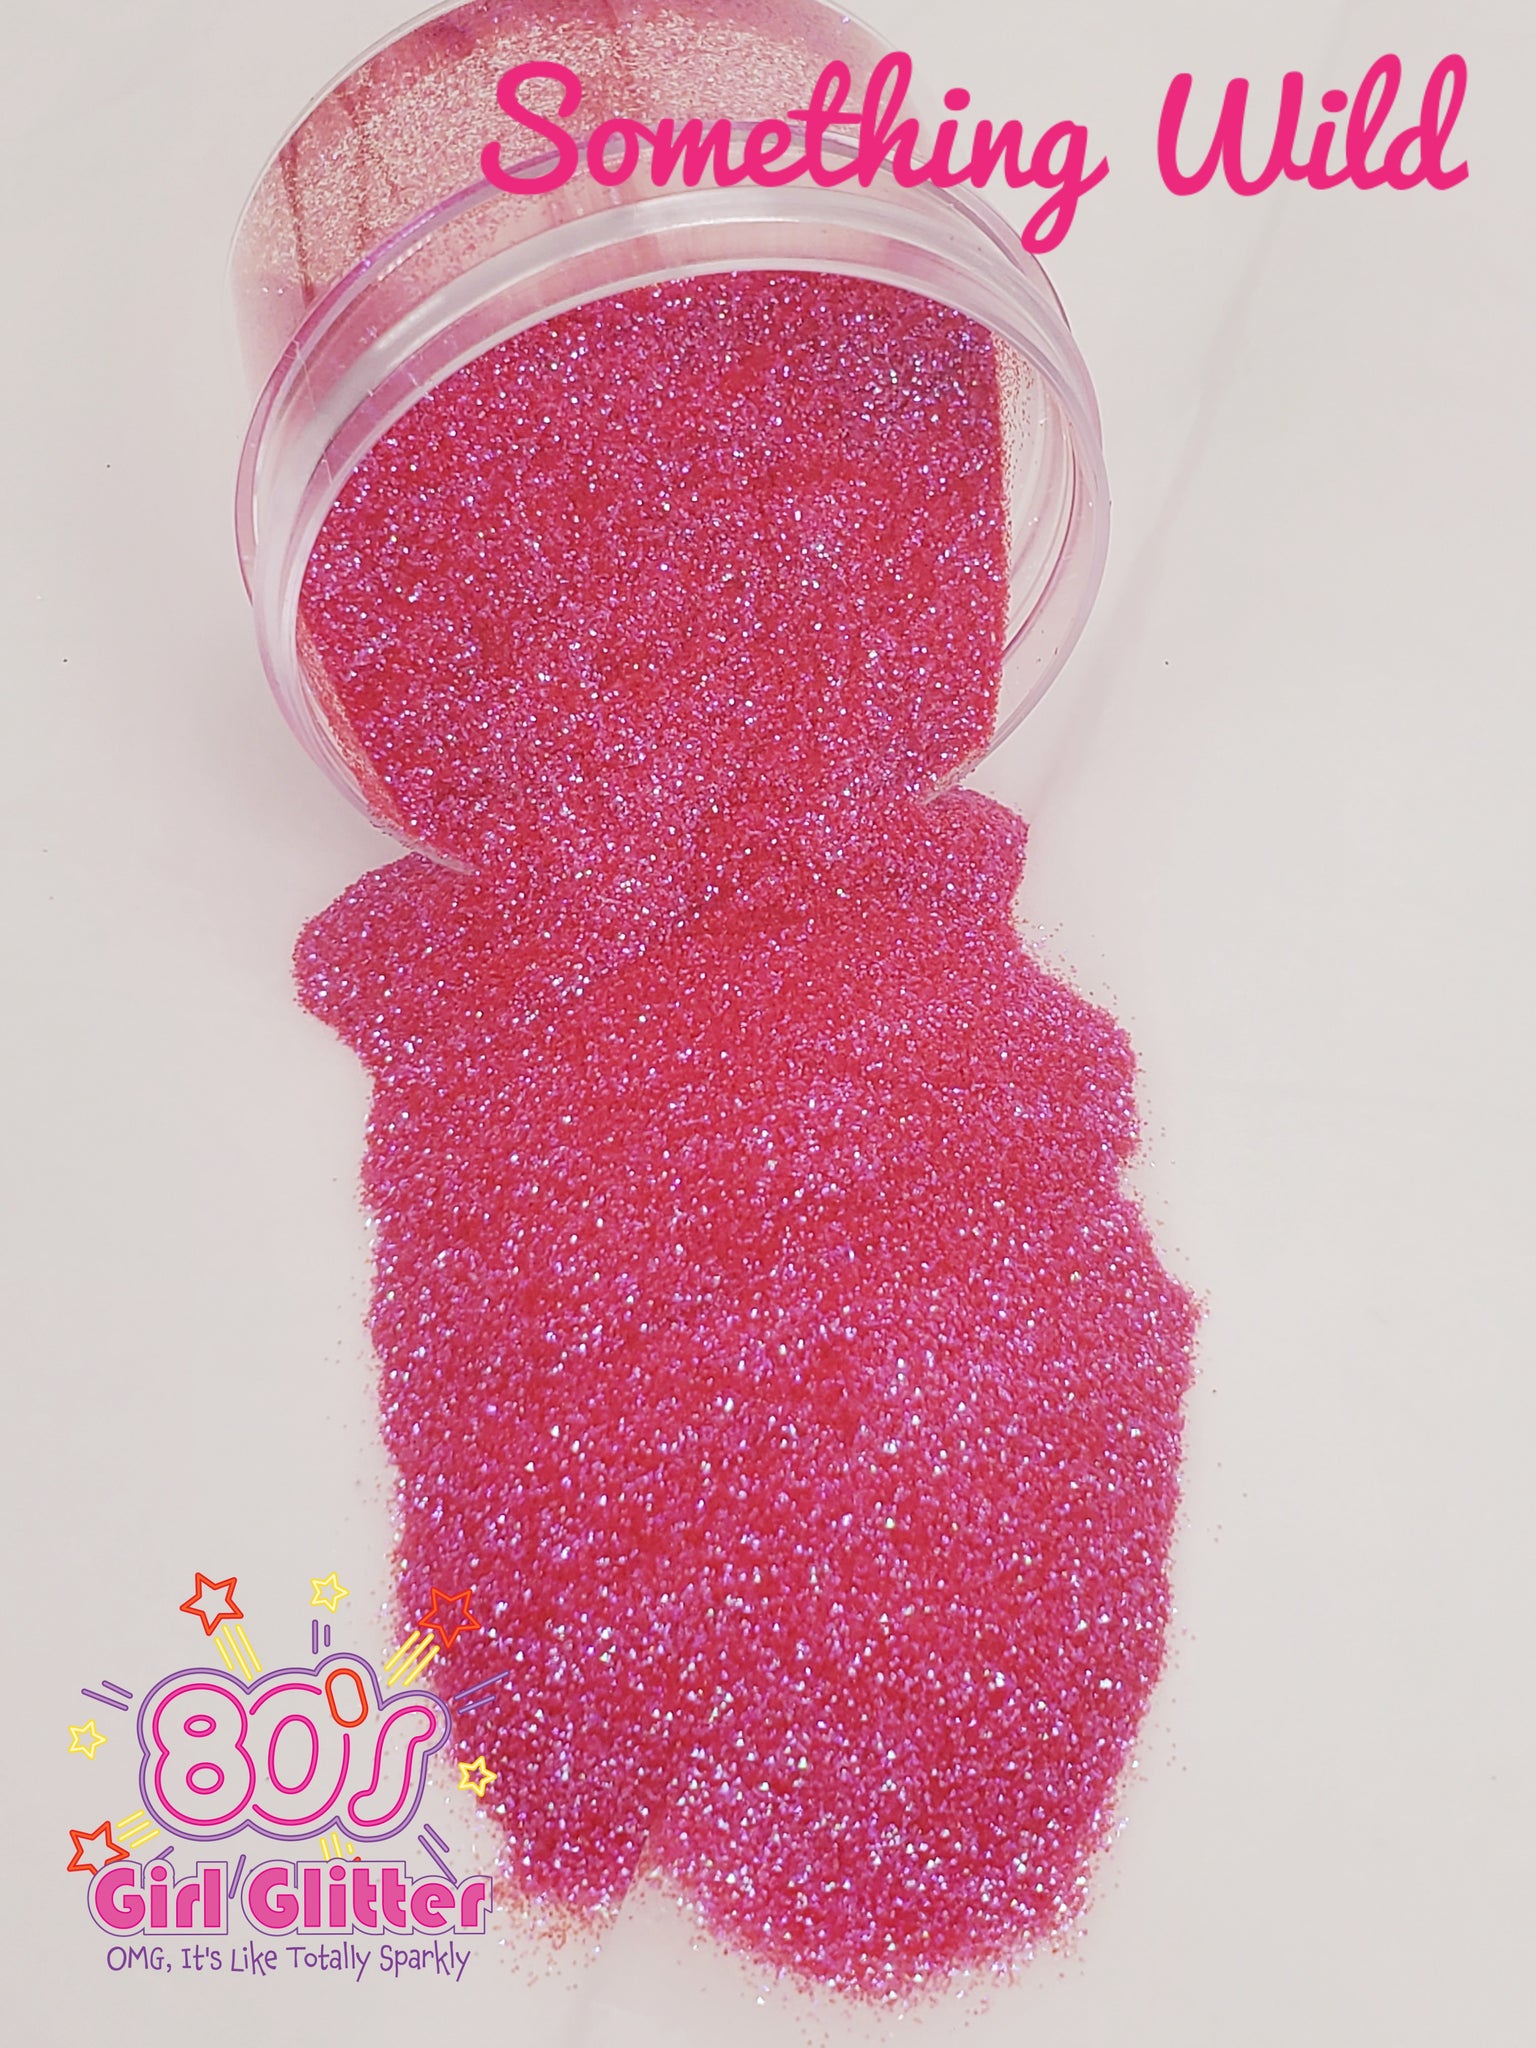 PINK Loose Chunky Cosmetic Glitter by Tag 10g